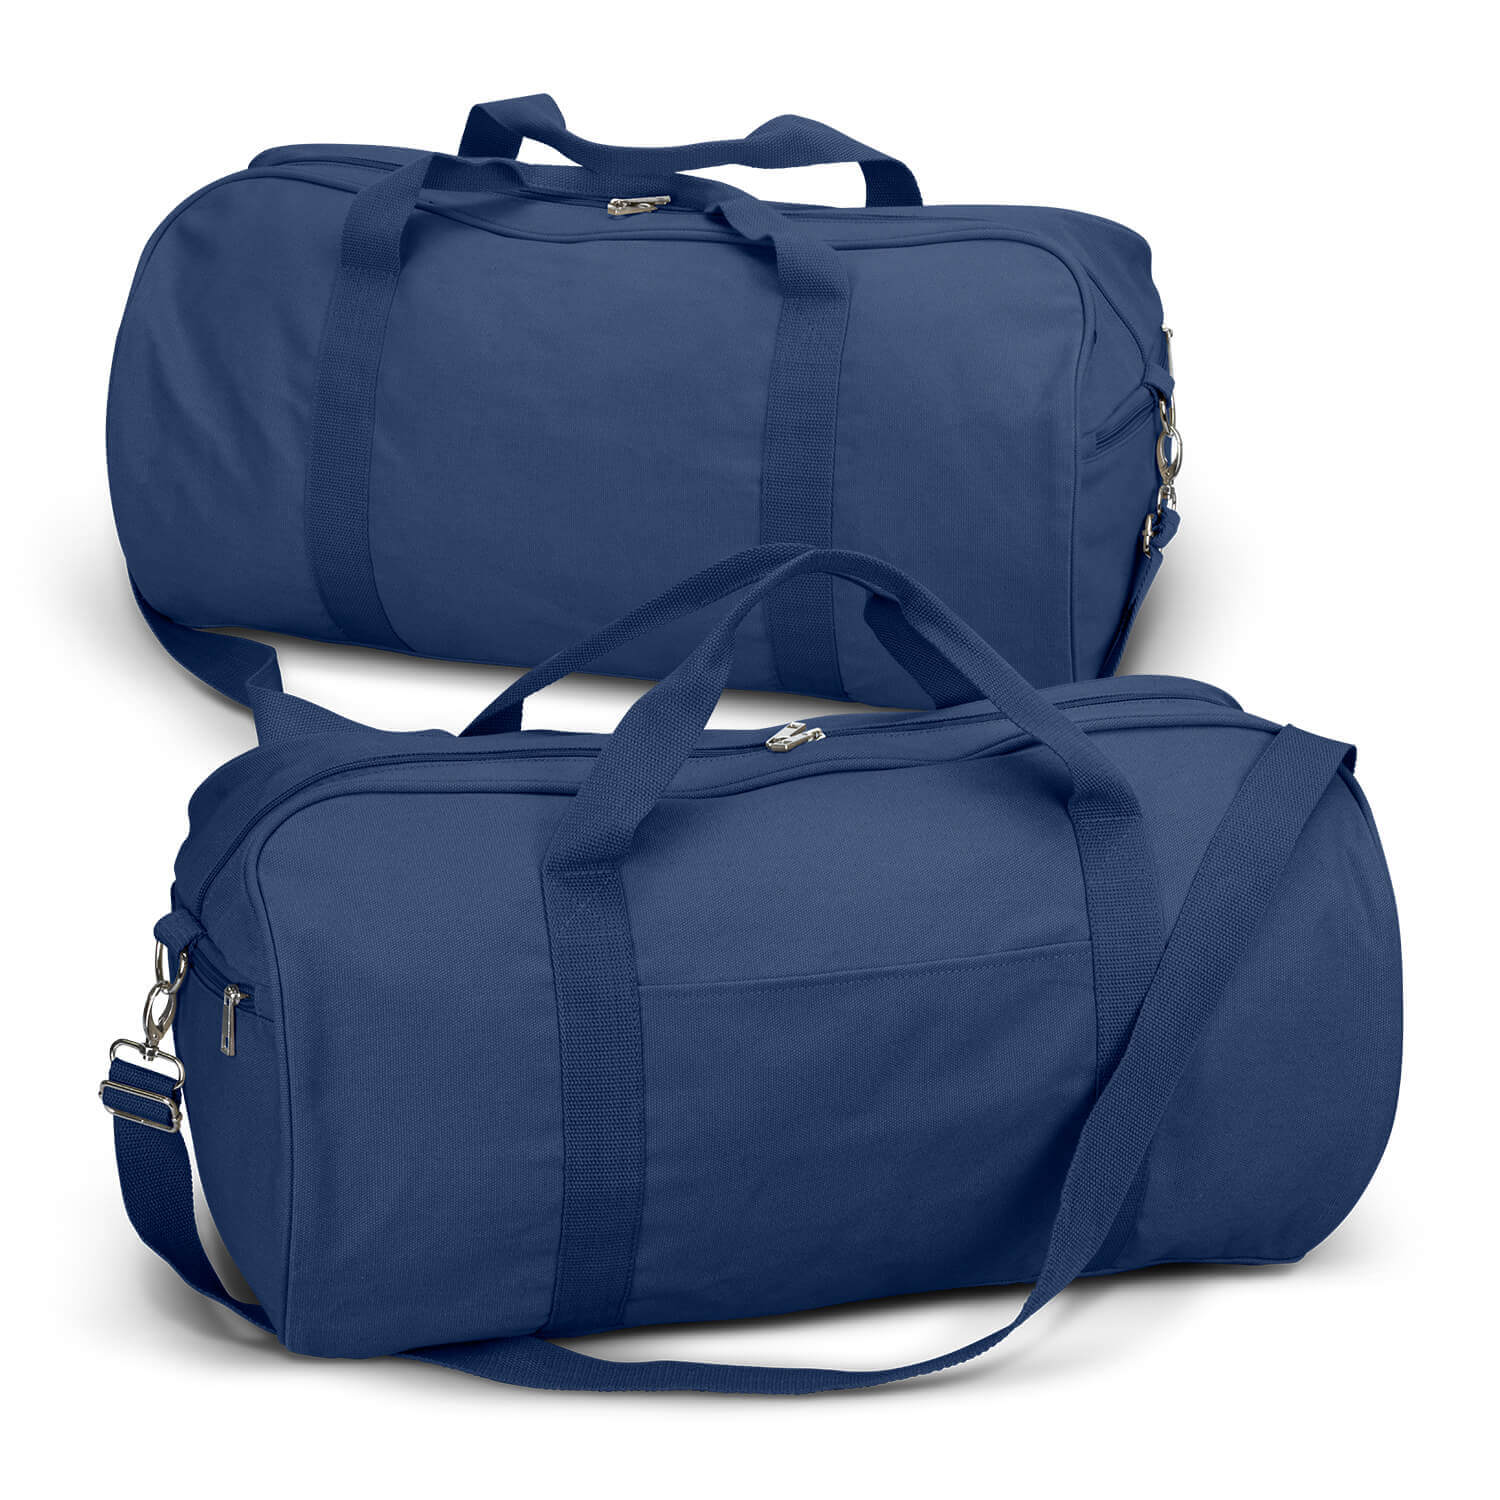 McMillan Duffle Bag - Northline Printing & Promotional Products